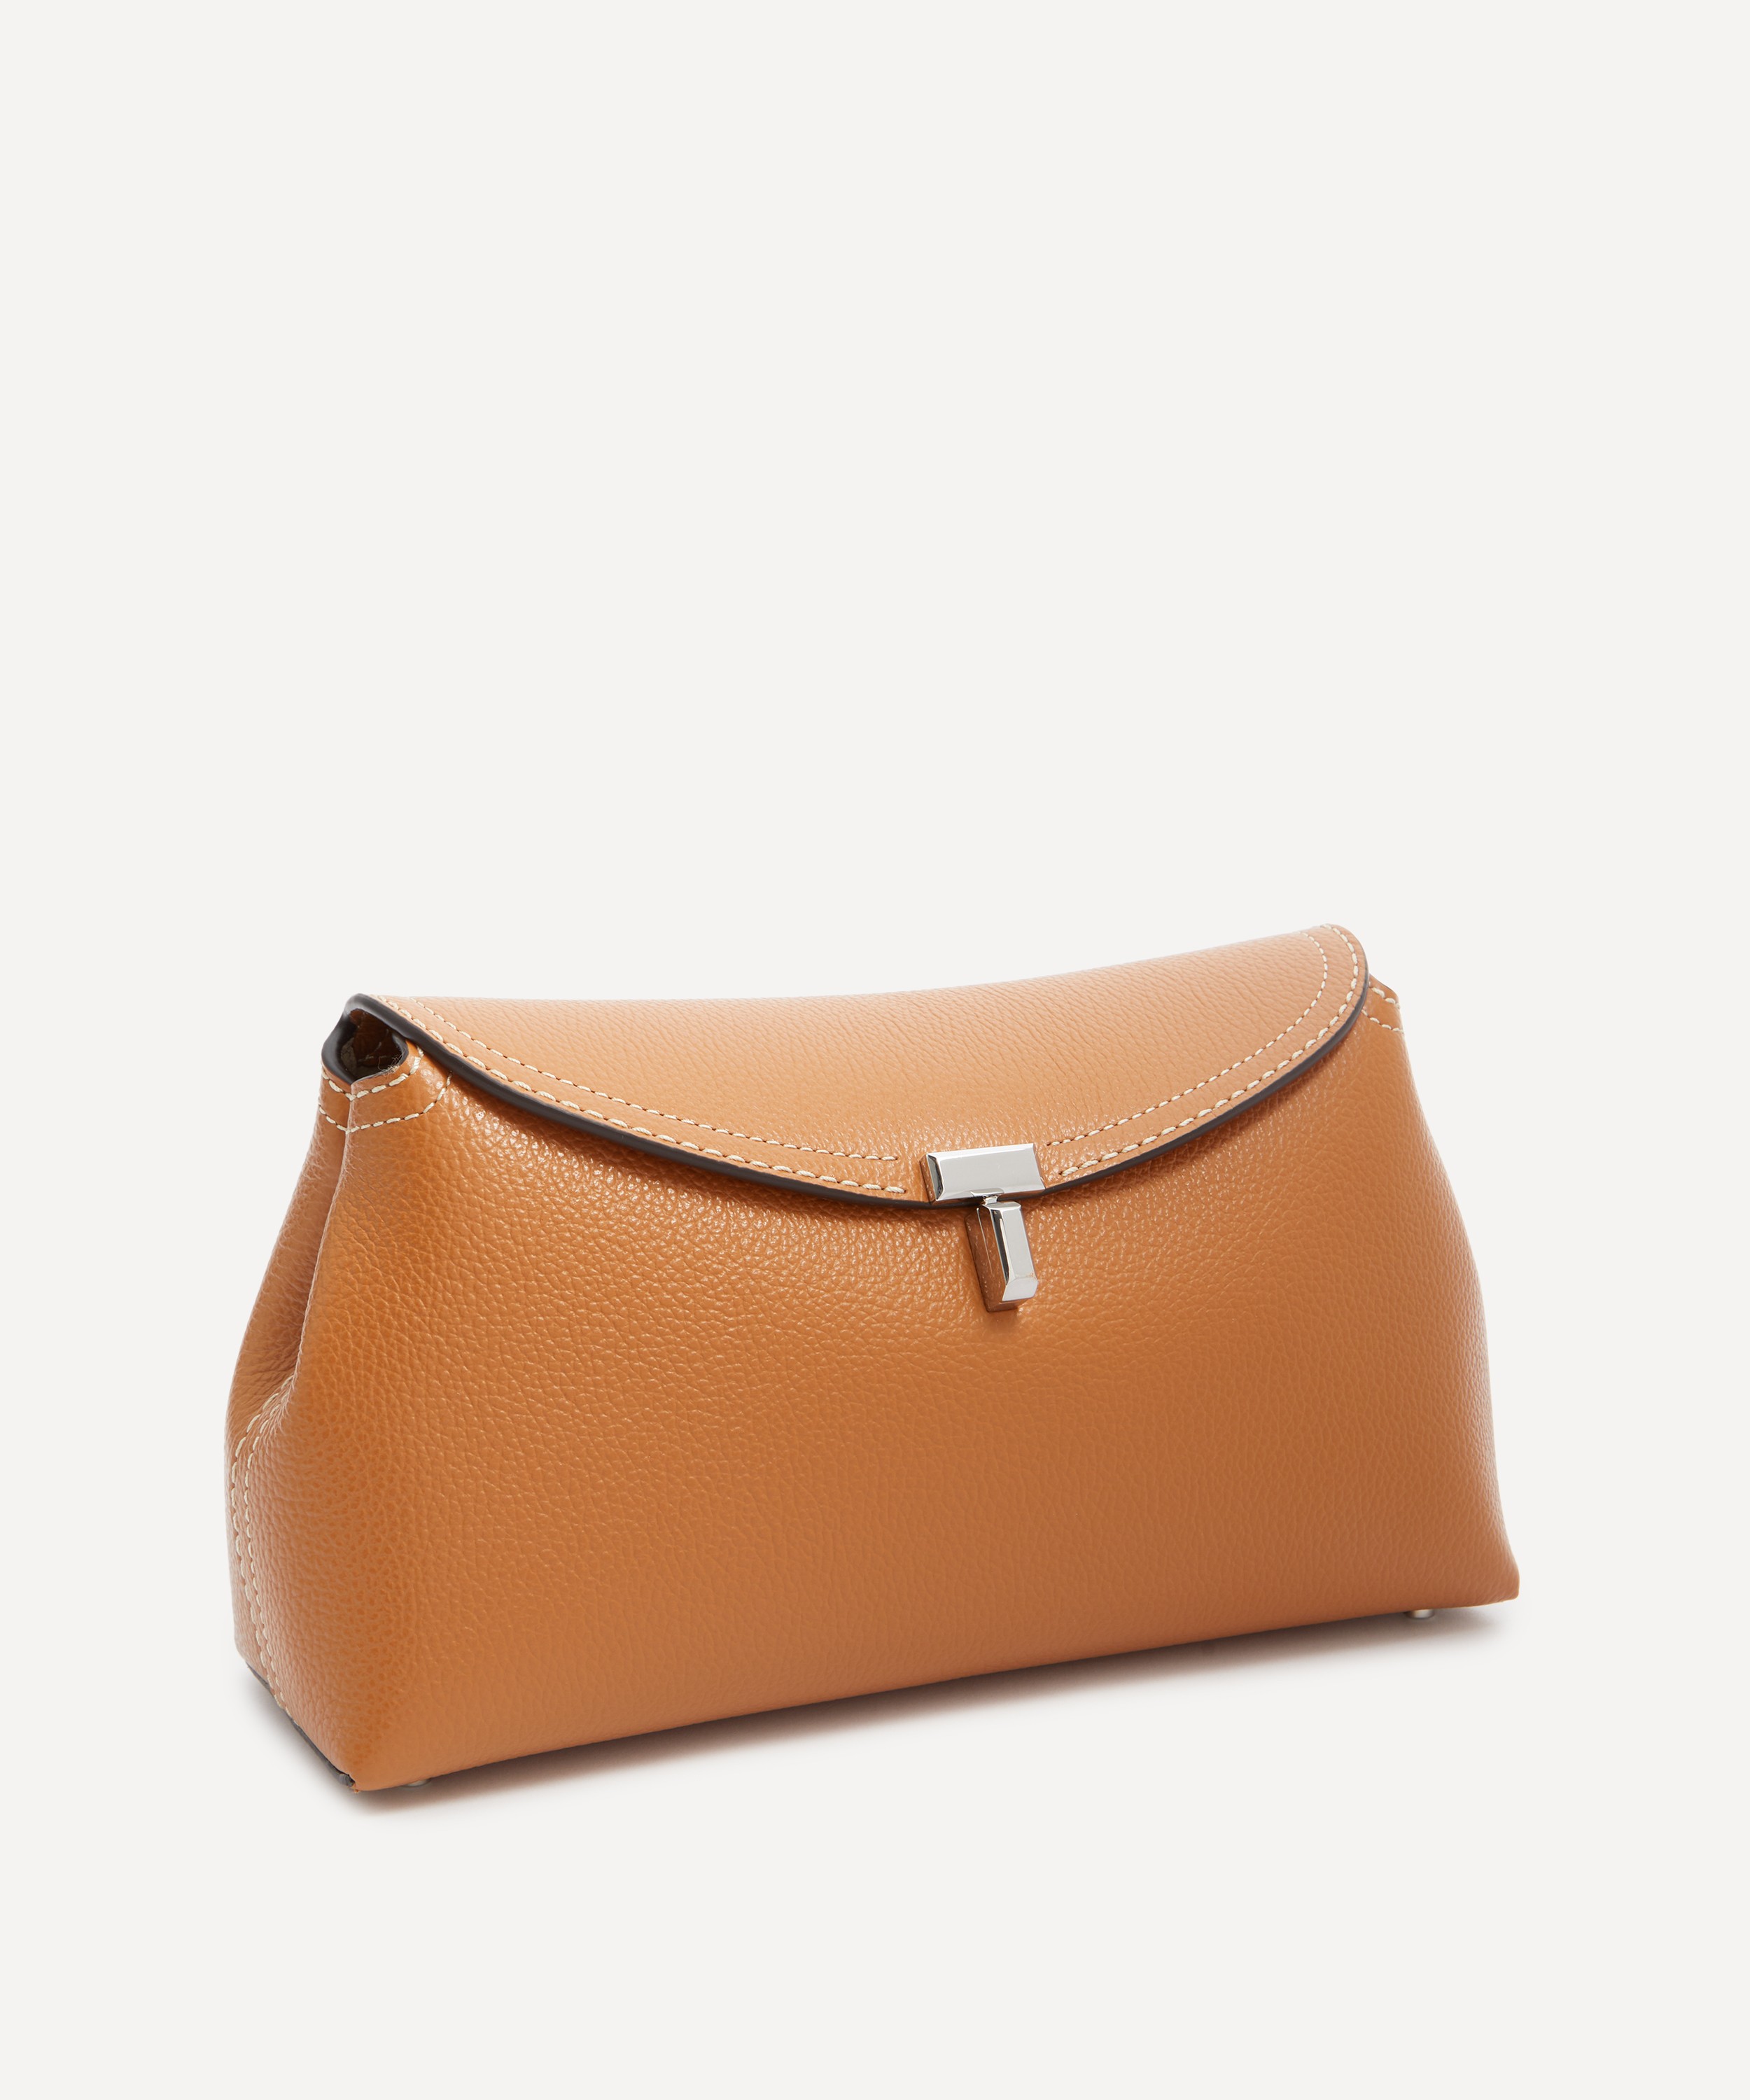 Toteme - T-Lock Tan Leather Clutch image number 2